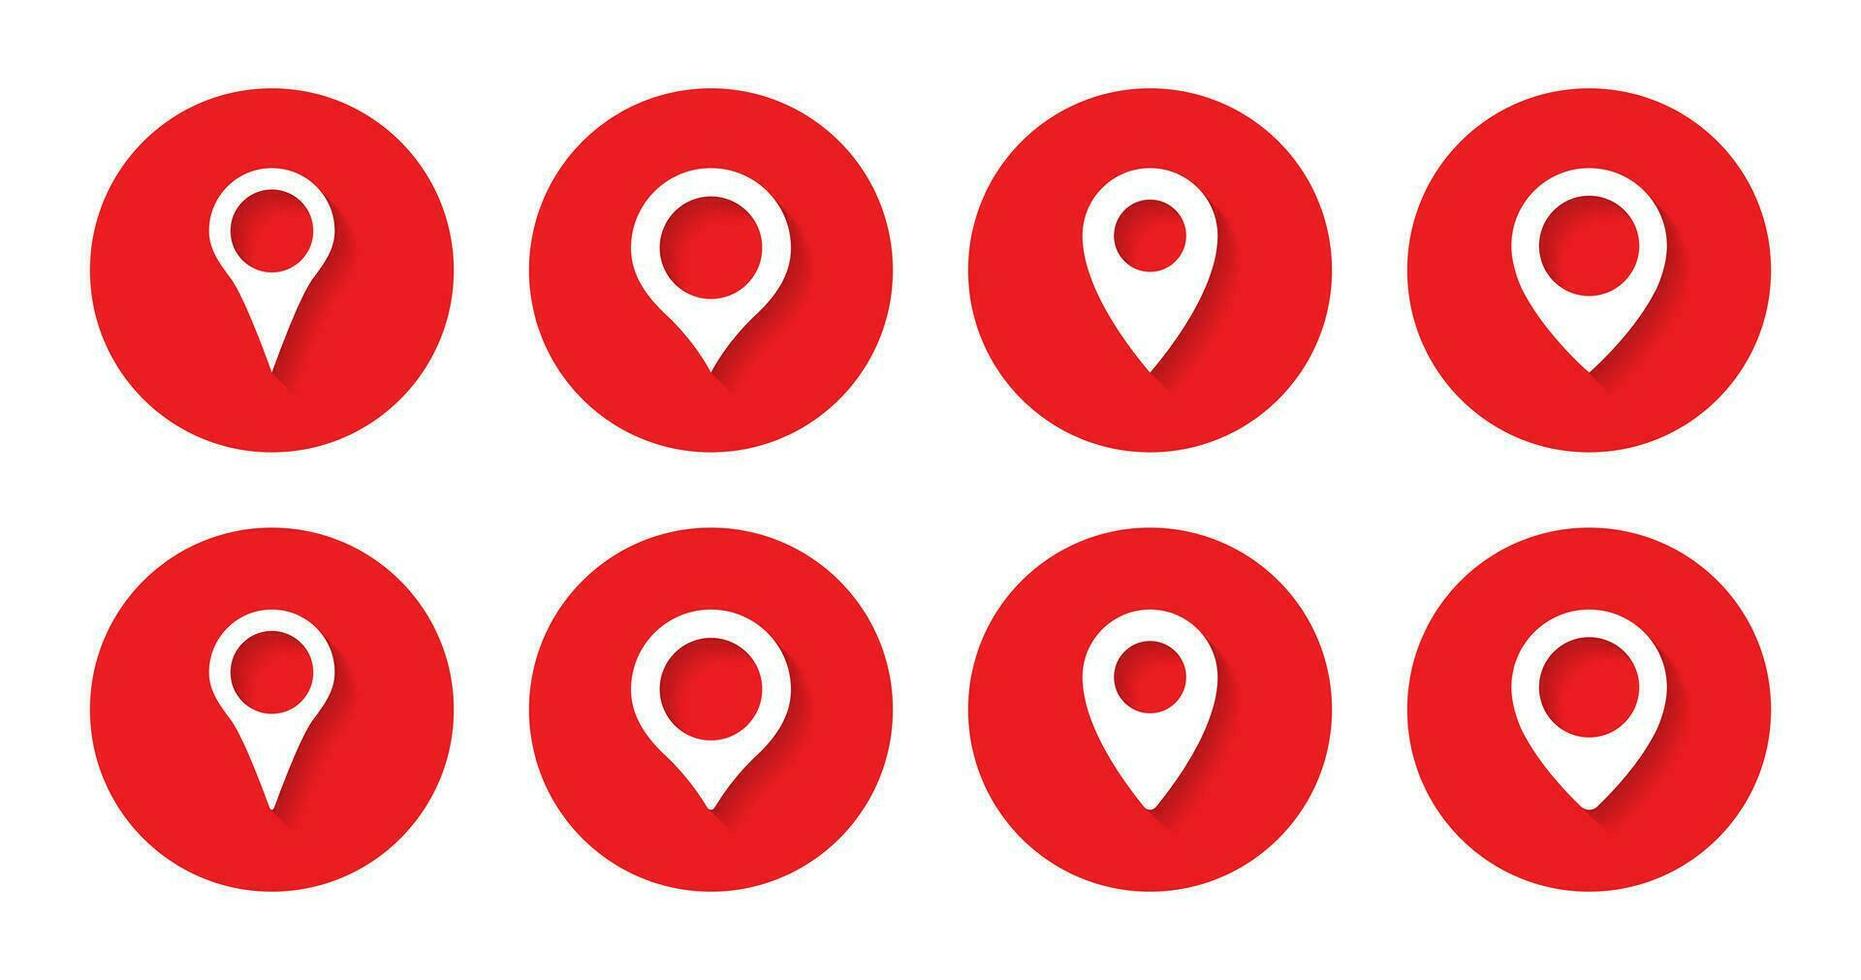 Location marker icon vector in red circle. Navigation pin symbol